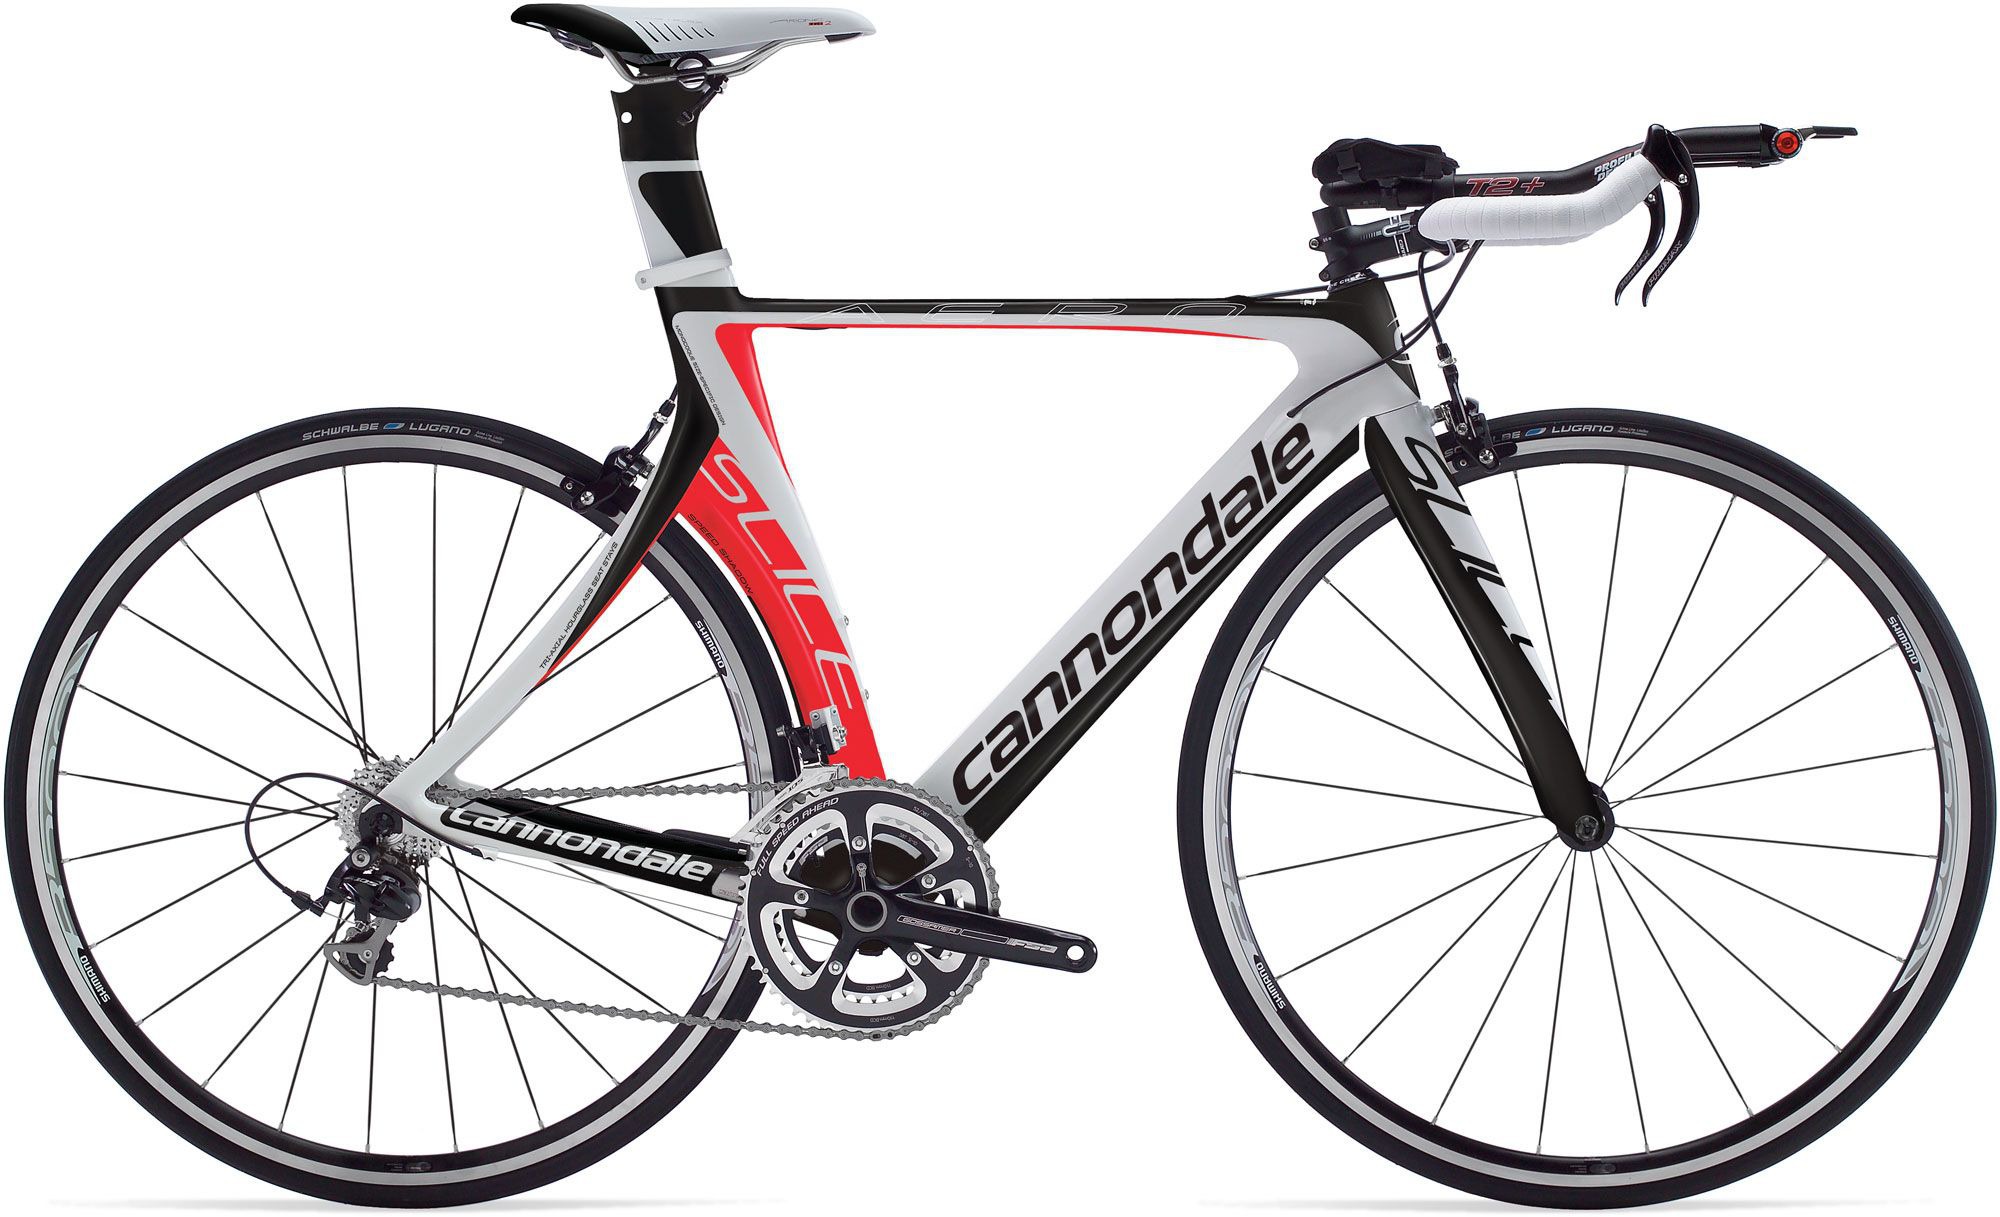 2011 Cannondale Slice 5 - Bicycle 